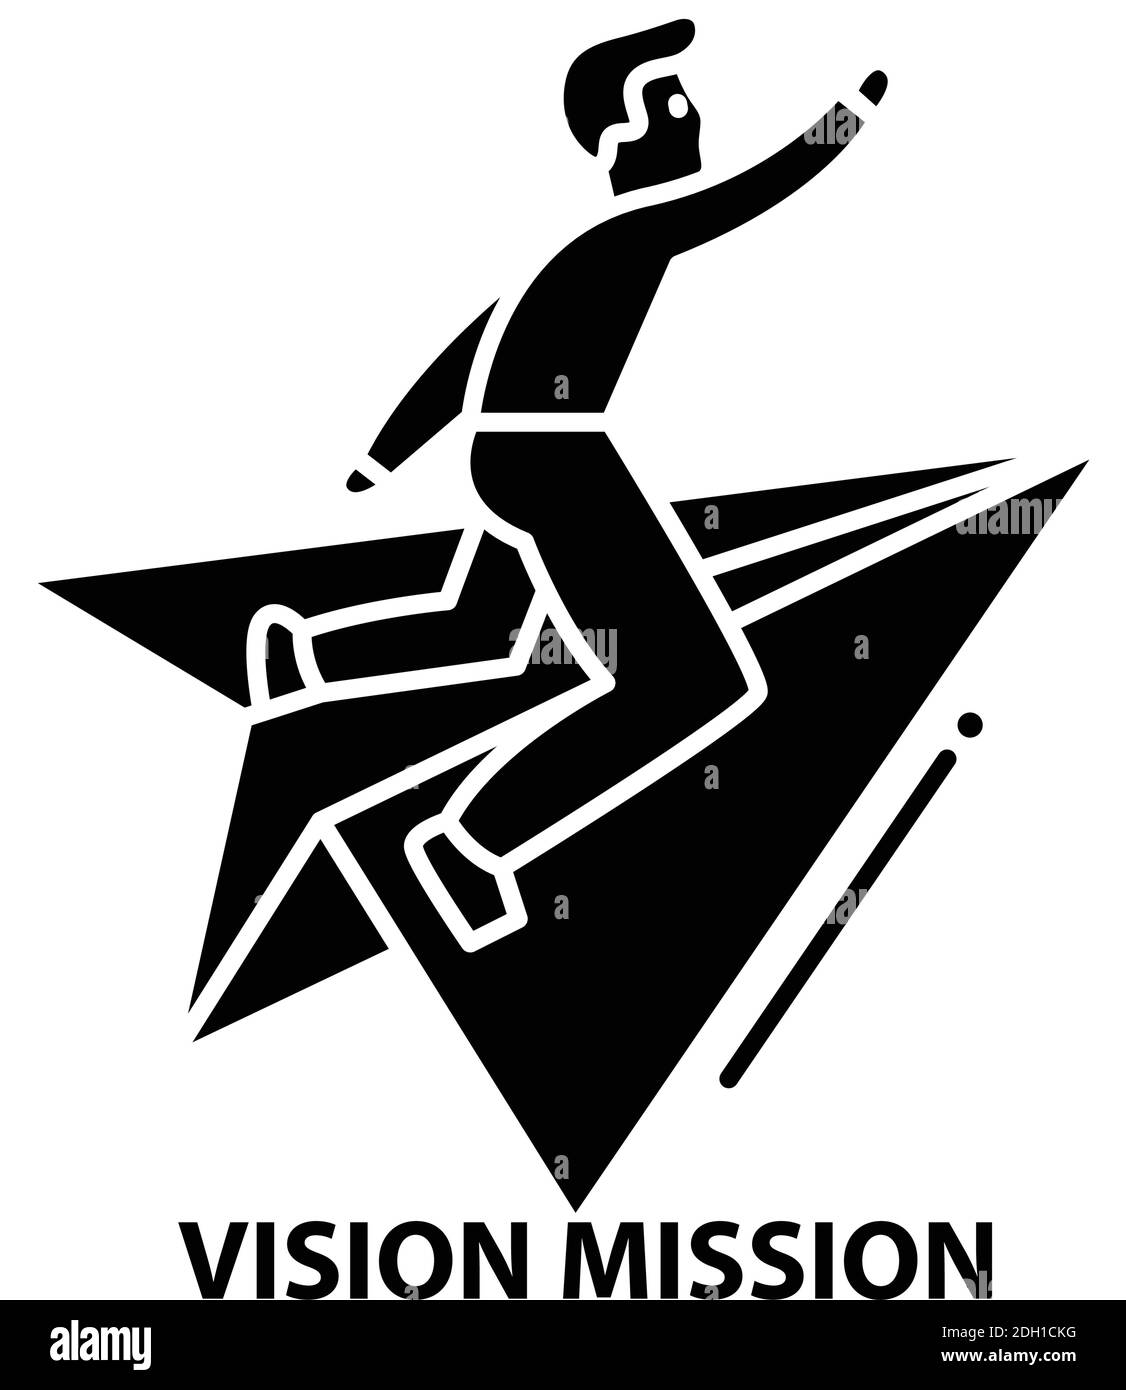 vision mission icon, black vector sign with editable strokes, concept illustration Stock Vector